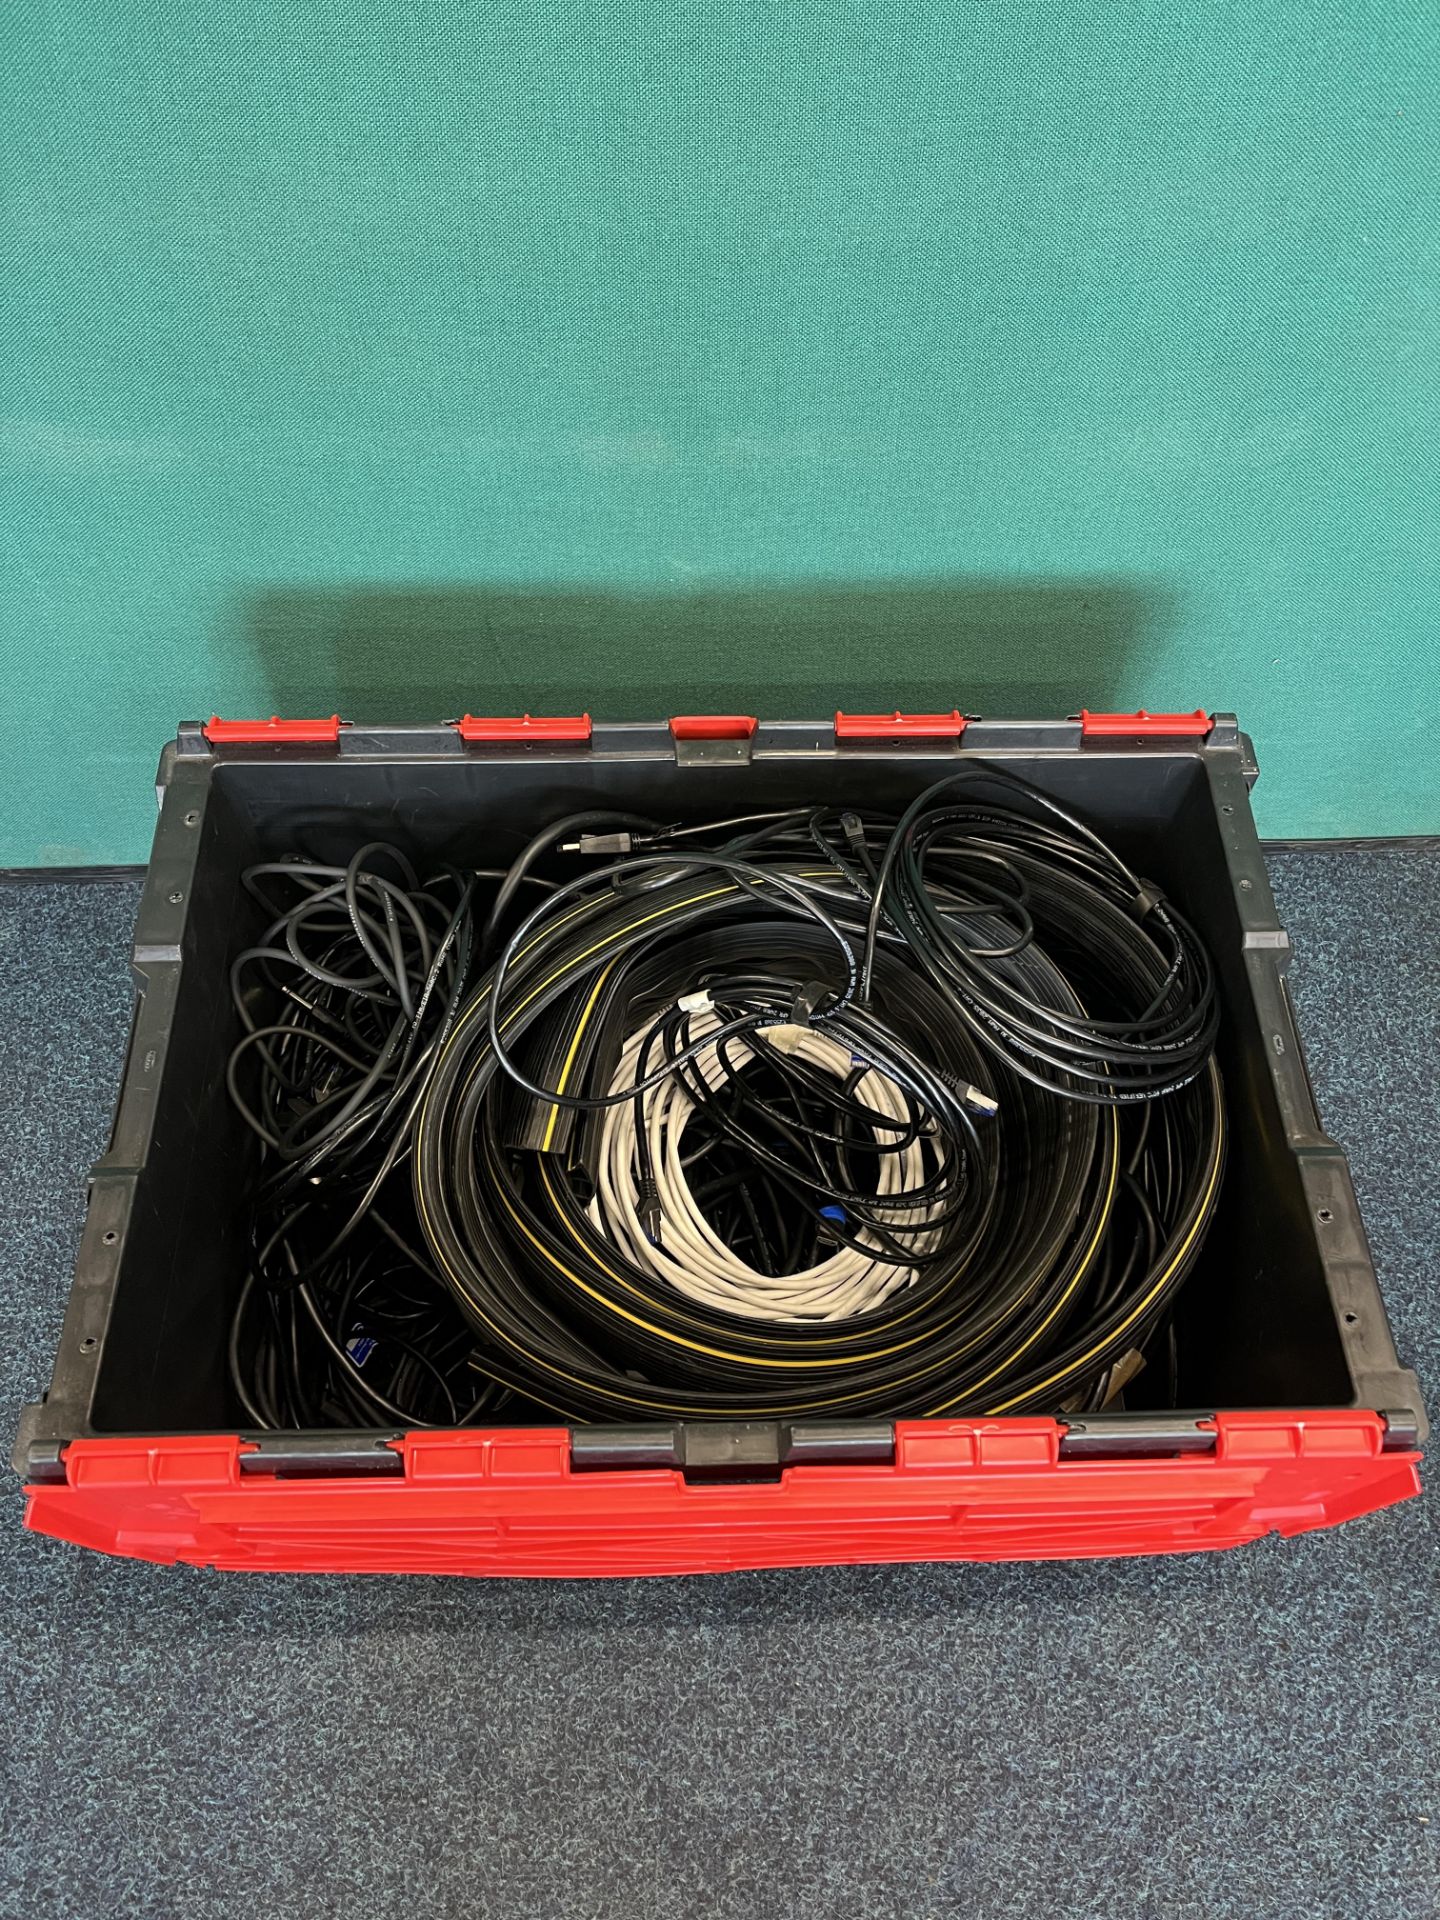 Various cabling - as pictured